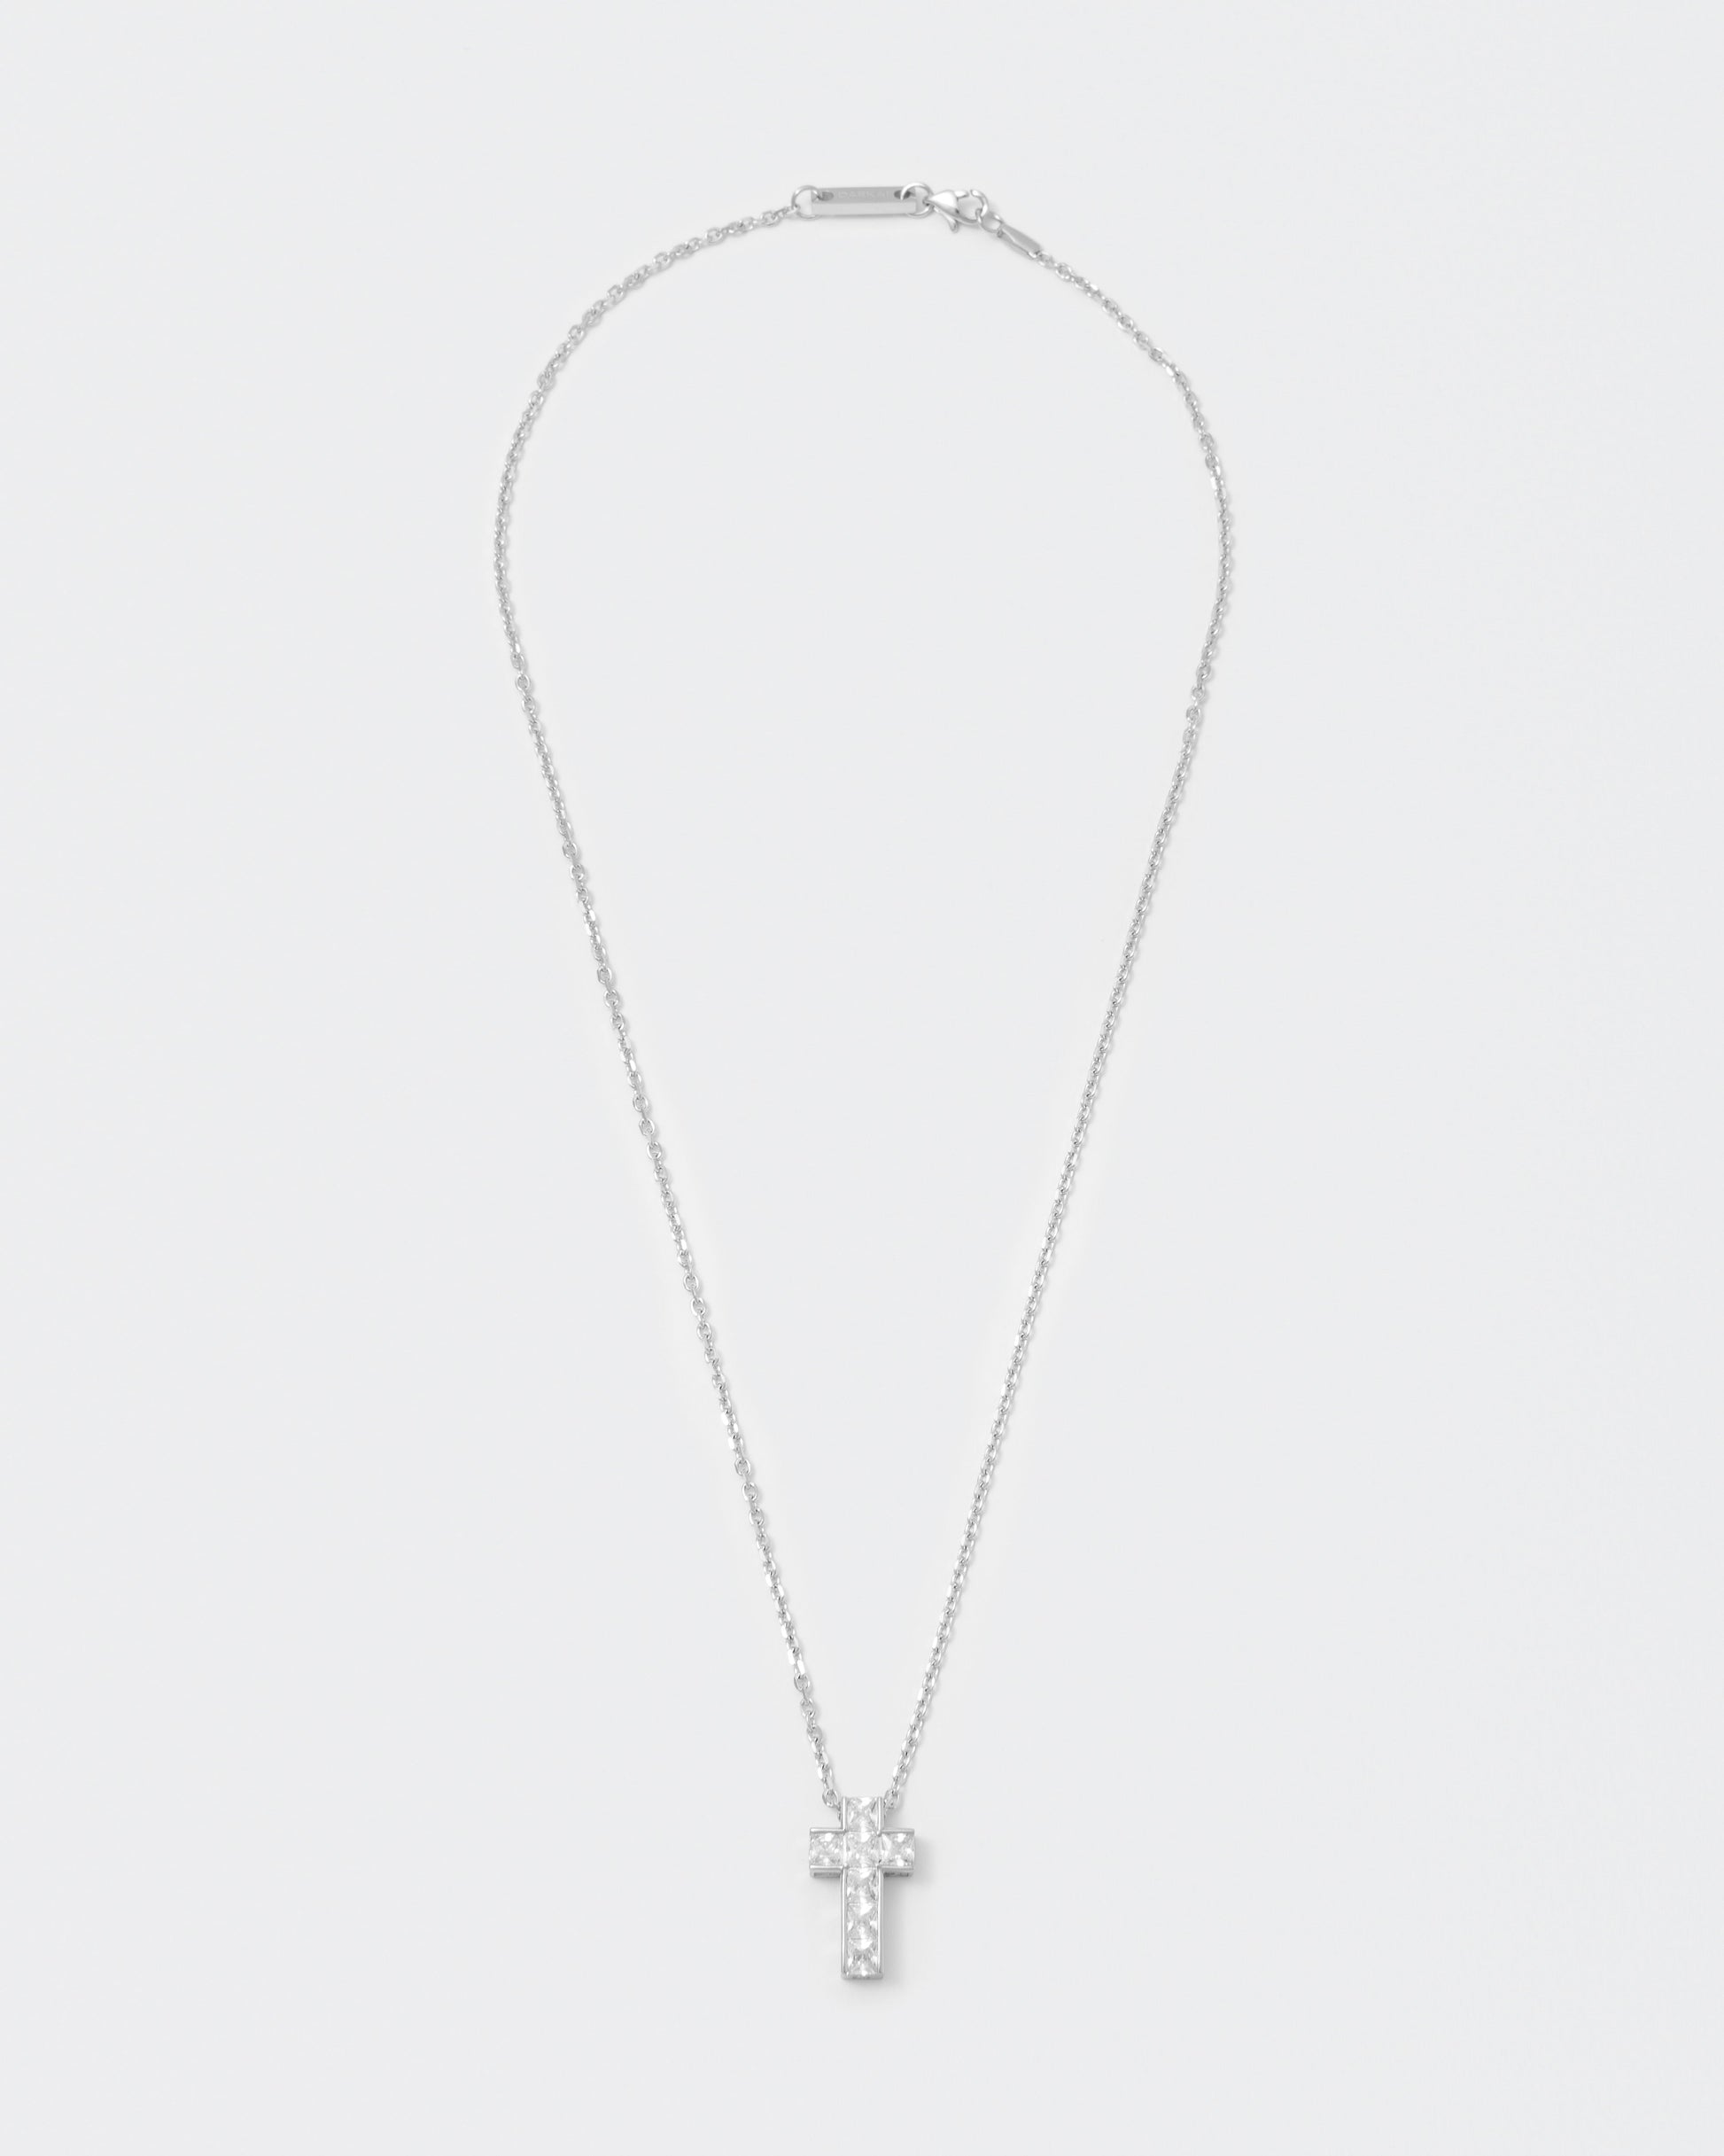 18k white gold coated cross pendant necklace with hand-set princess-cut stones in white and 3mm box chain